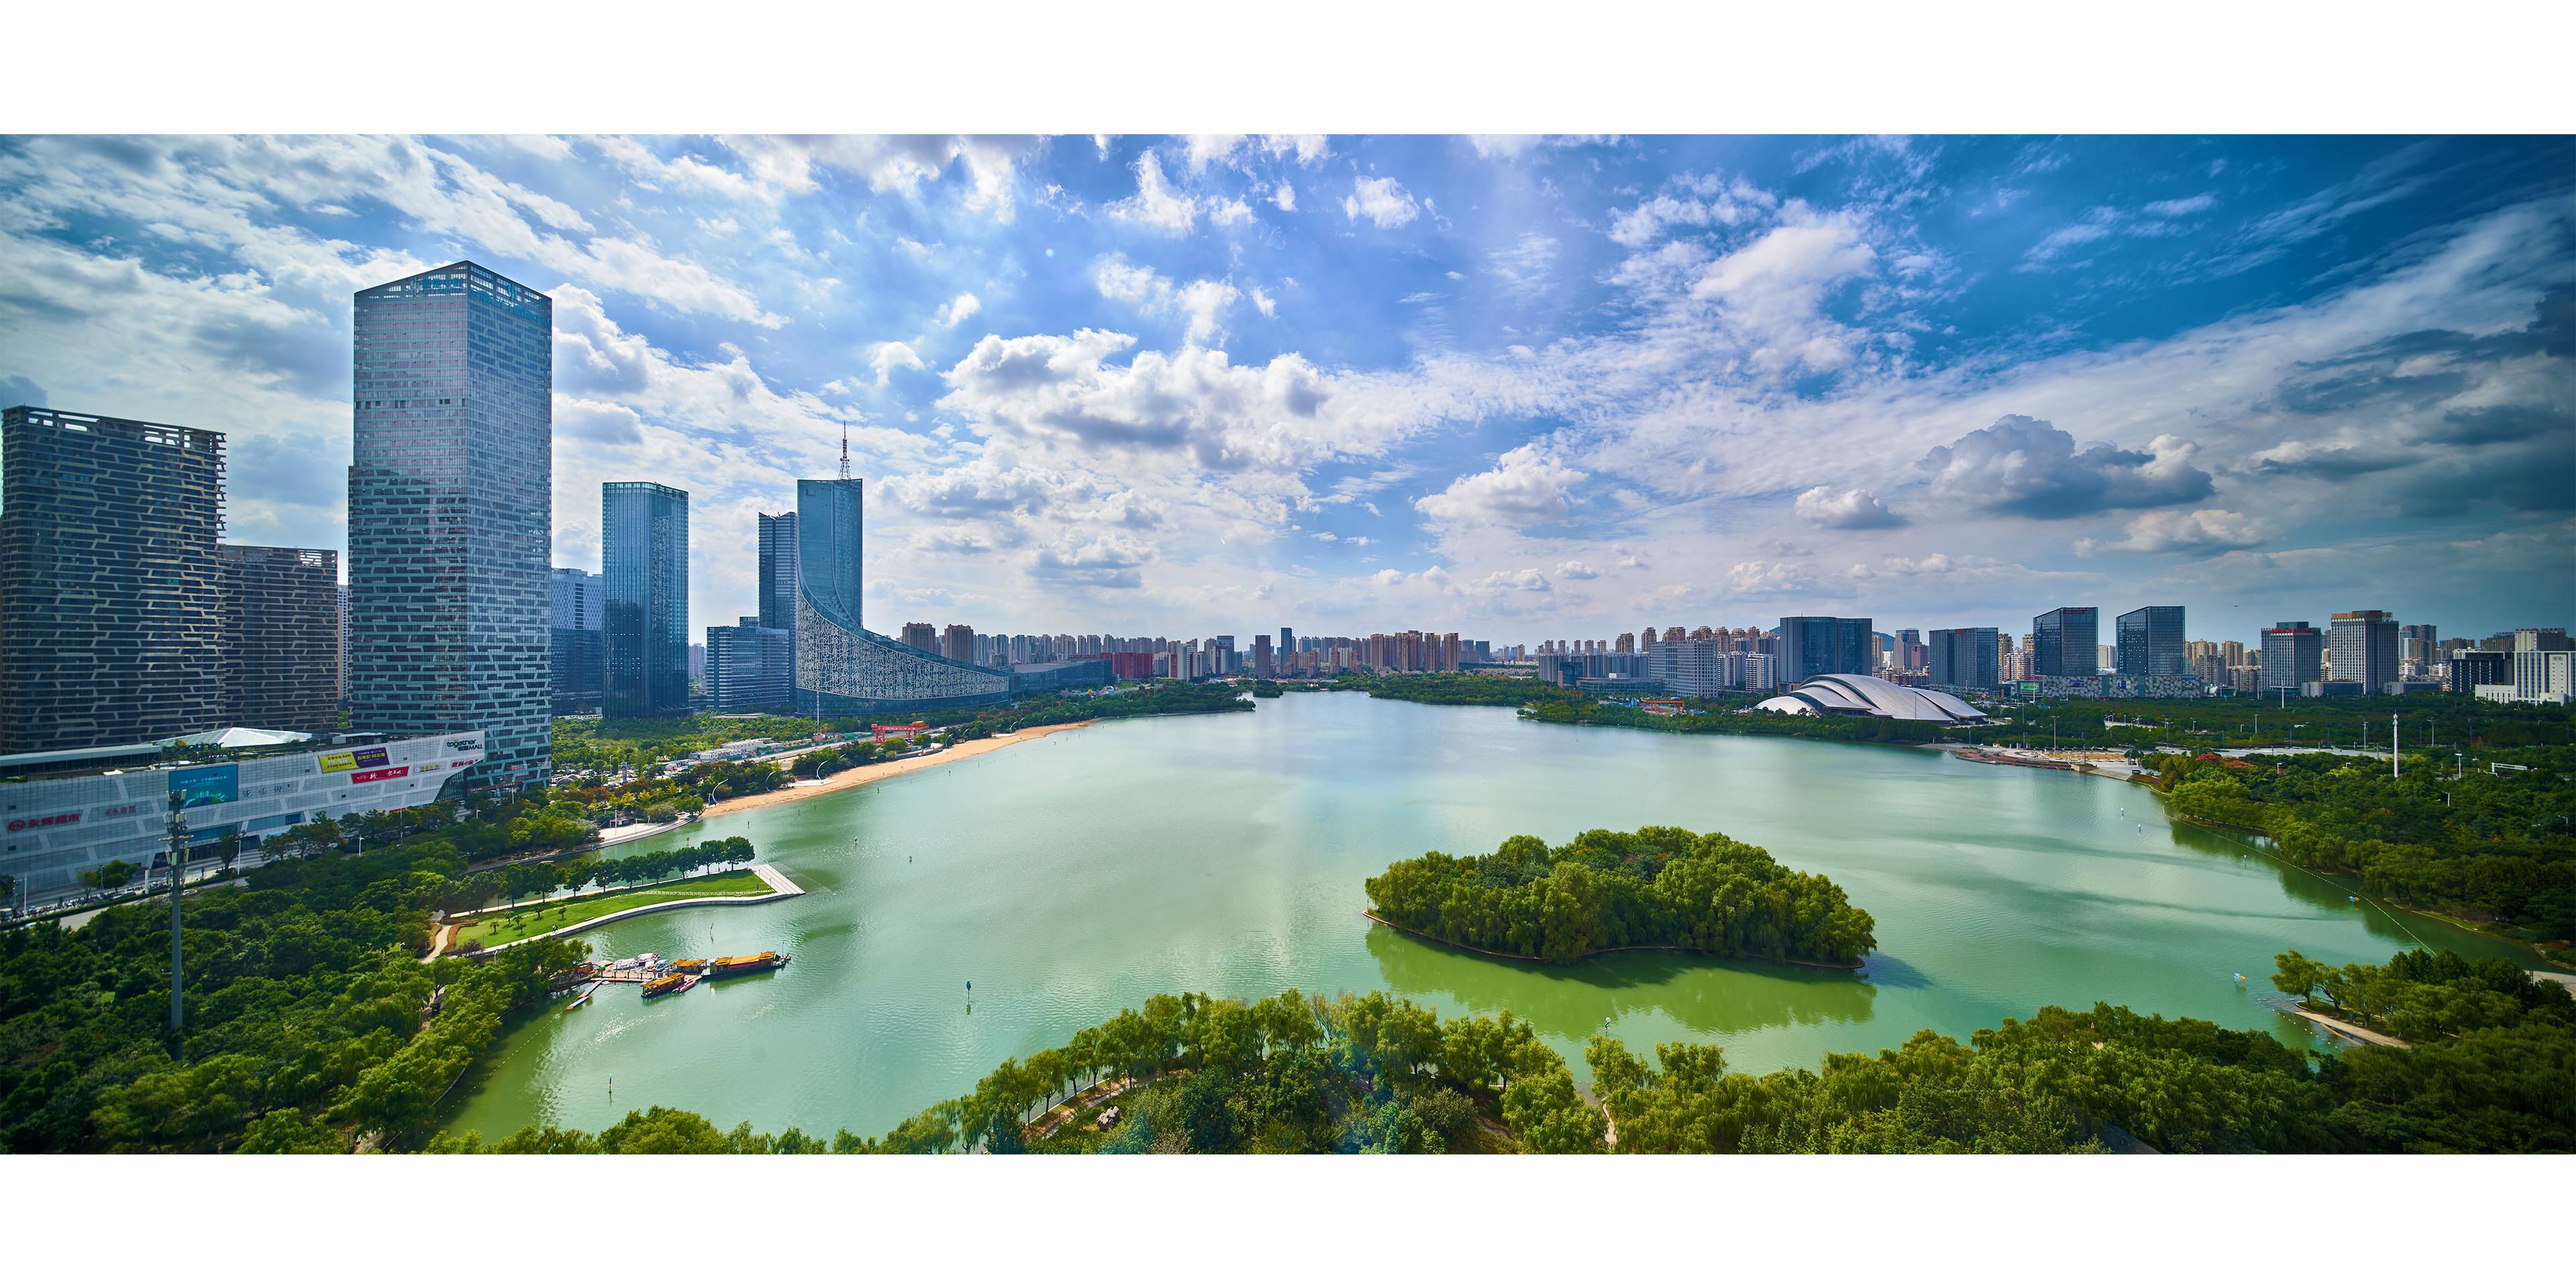 InterContinental Hefei is located on the banks of beautiful Swan Lake in Hefei’s newest business district. In addition to luxurious accommodation, the hotel features a pristine private garden where guests can enjoy the picturesque scenic environment.